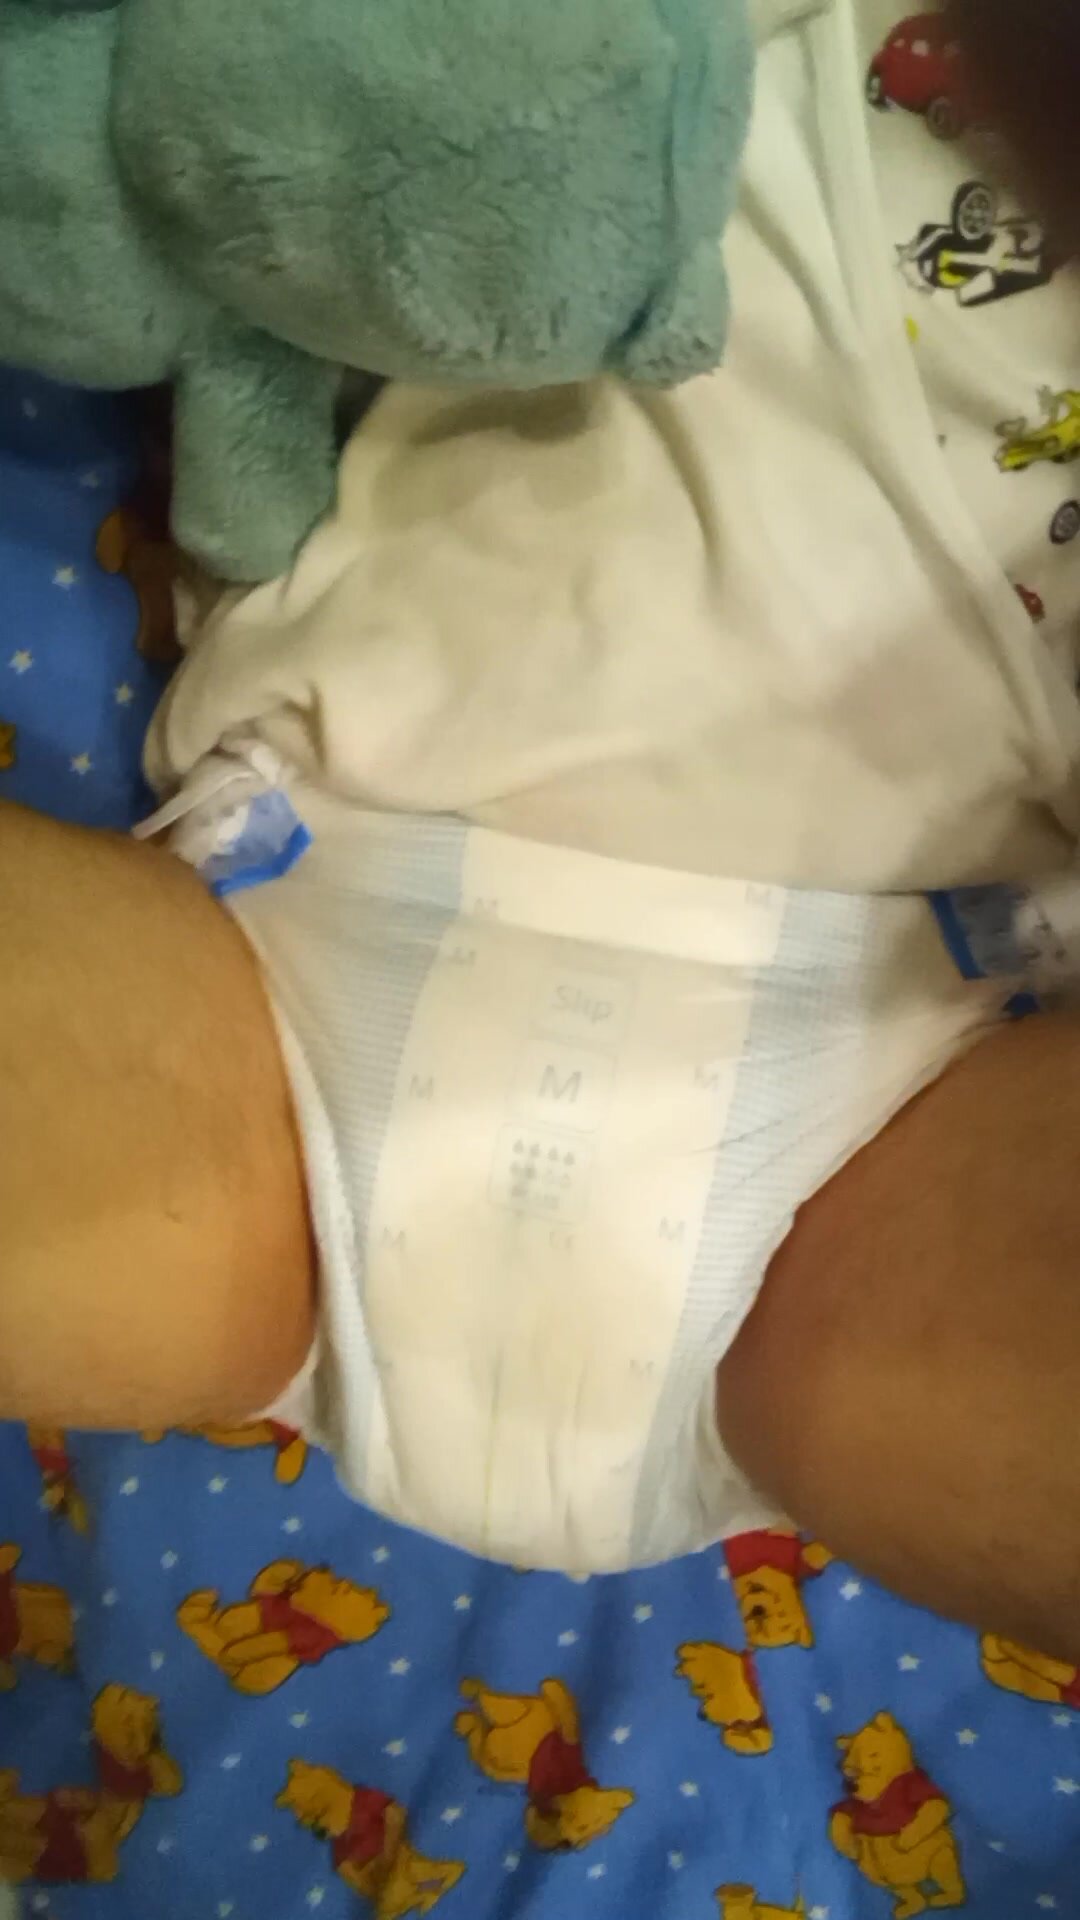 Babyboy opens poopy diaper